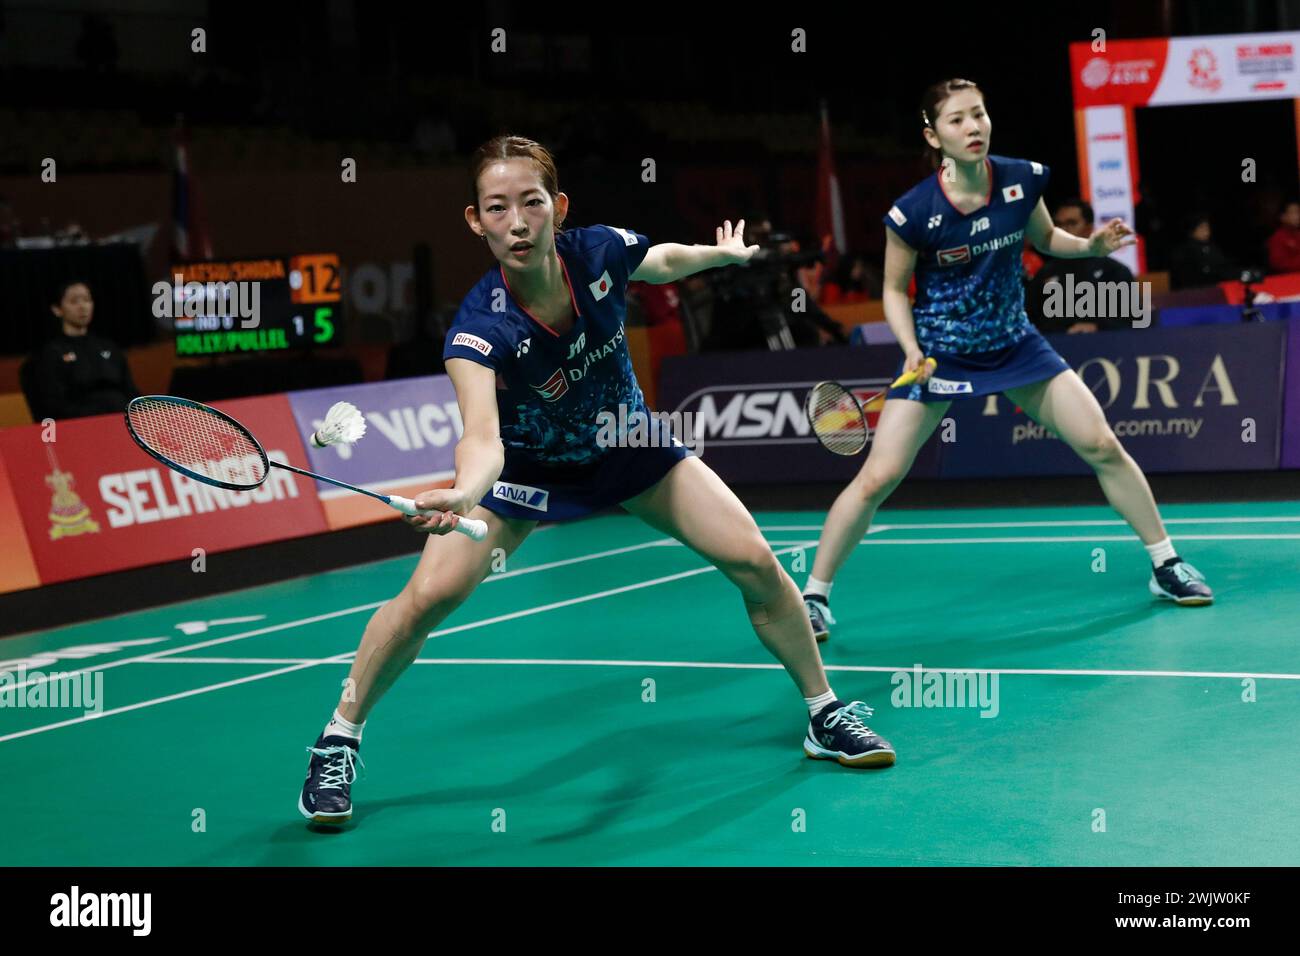 Shah Alam, Malaysia. 17th Feb, 2024. Matsuyama Nami(L)/Shida Chiharu of Japan compete in the doubles match against Treesa Jolly/Gayatri Gopichand Pullela of India during the women's team semifinal between Japan and India at the Badminton Asia Team Championships 2024 in Shah Alam, Selangor, Malaysia, Feb. 17, 2024. Credit: FL Wong/Xinhua/Alamy Live News Stock Photo